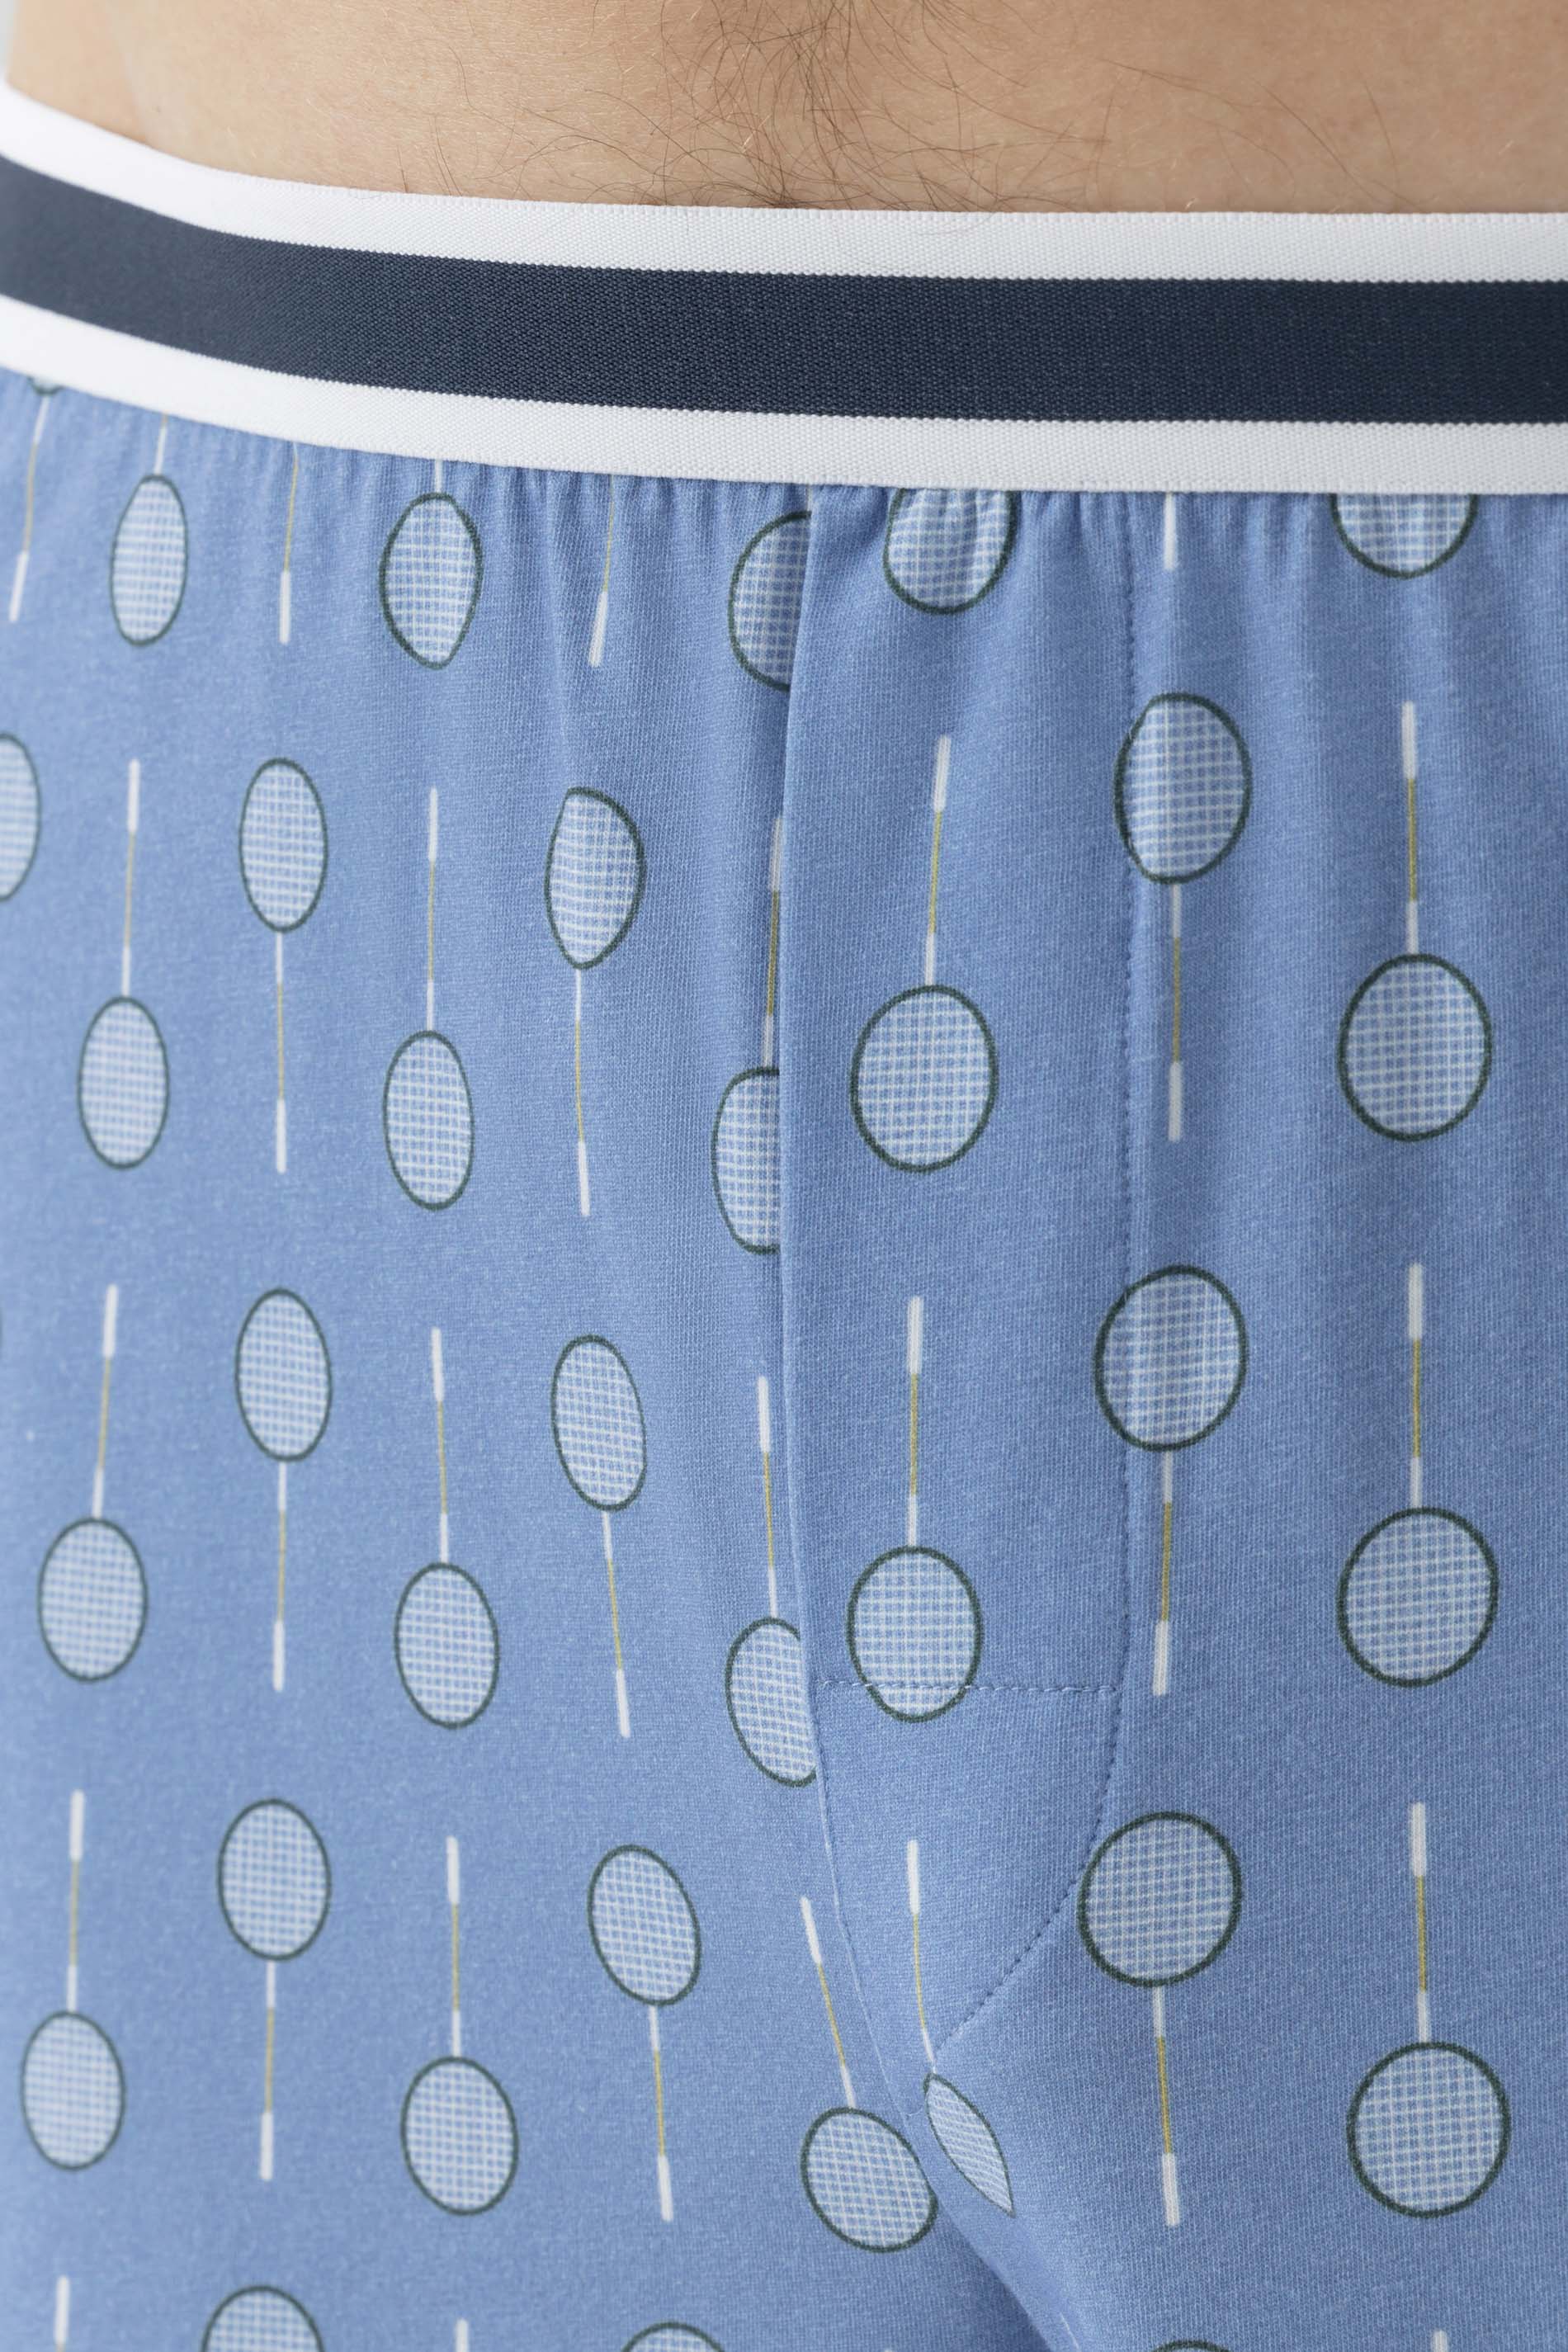 Shorts Serie Racket Detail View 01 | mey®